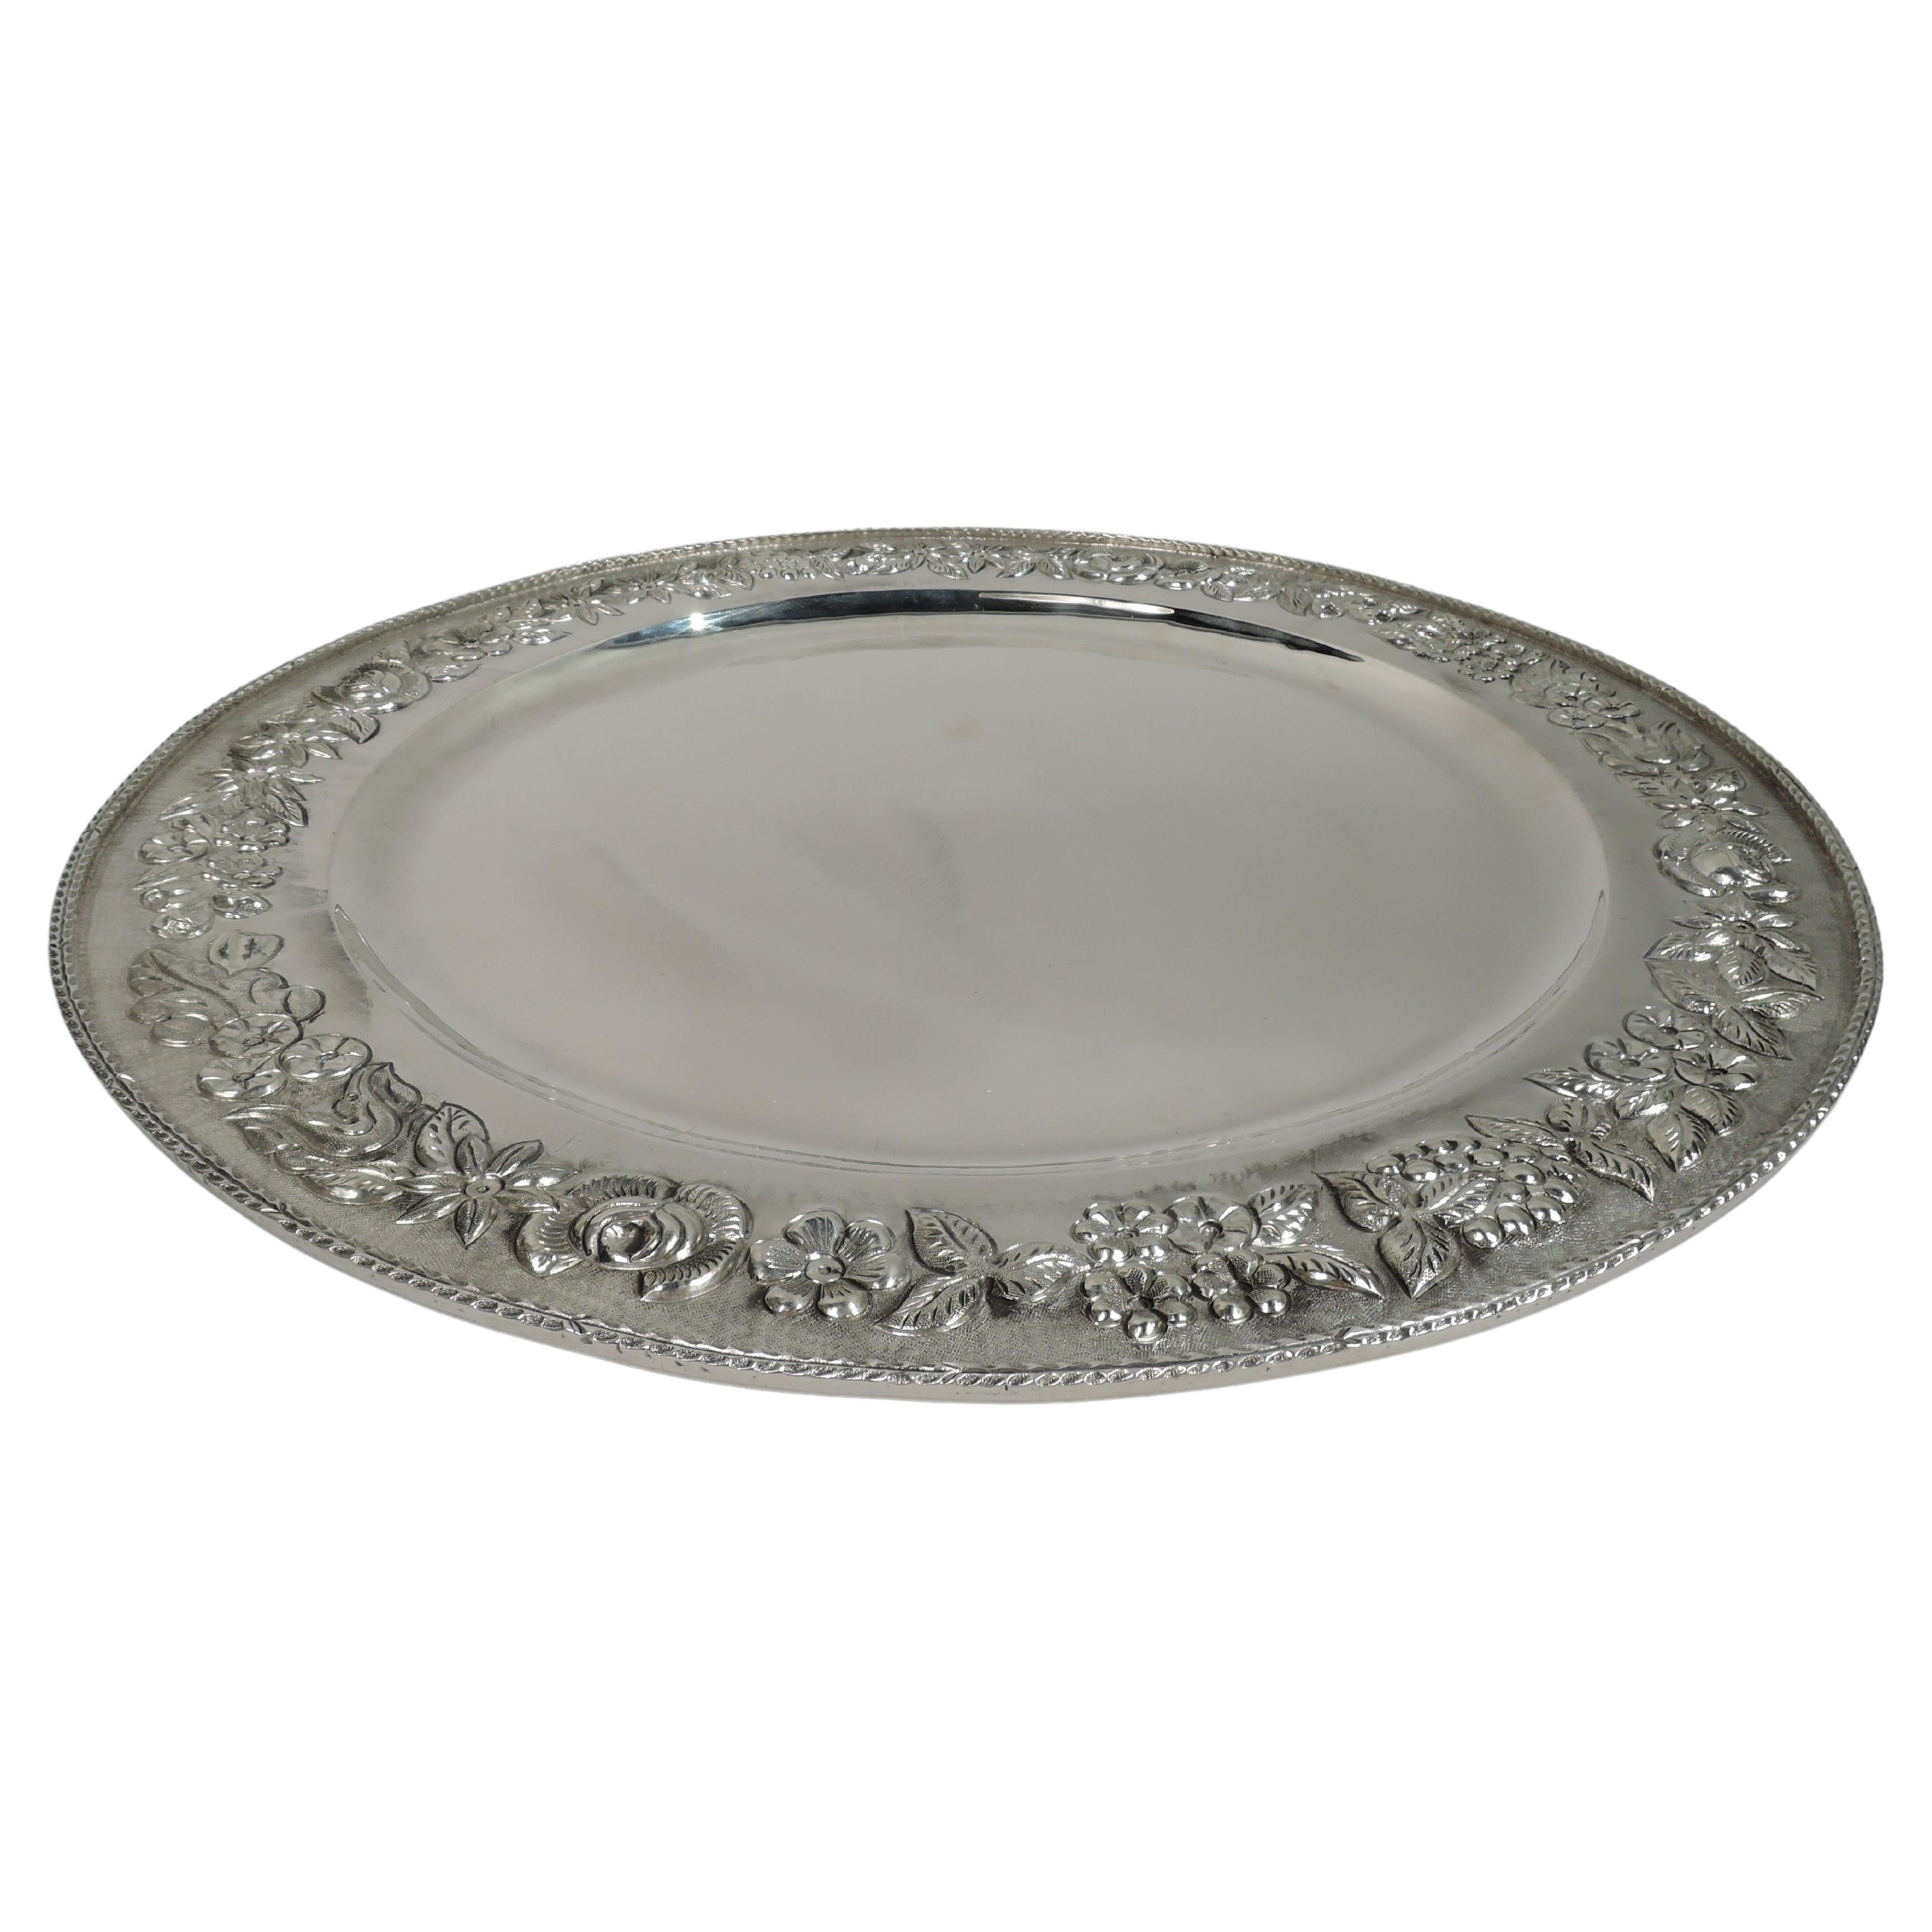 Large & Pretty Silver 16-Inch Round Tray with Repousse Floral Garland For Sale